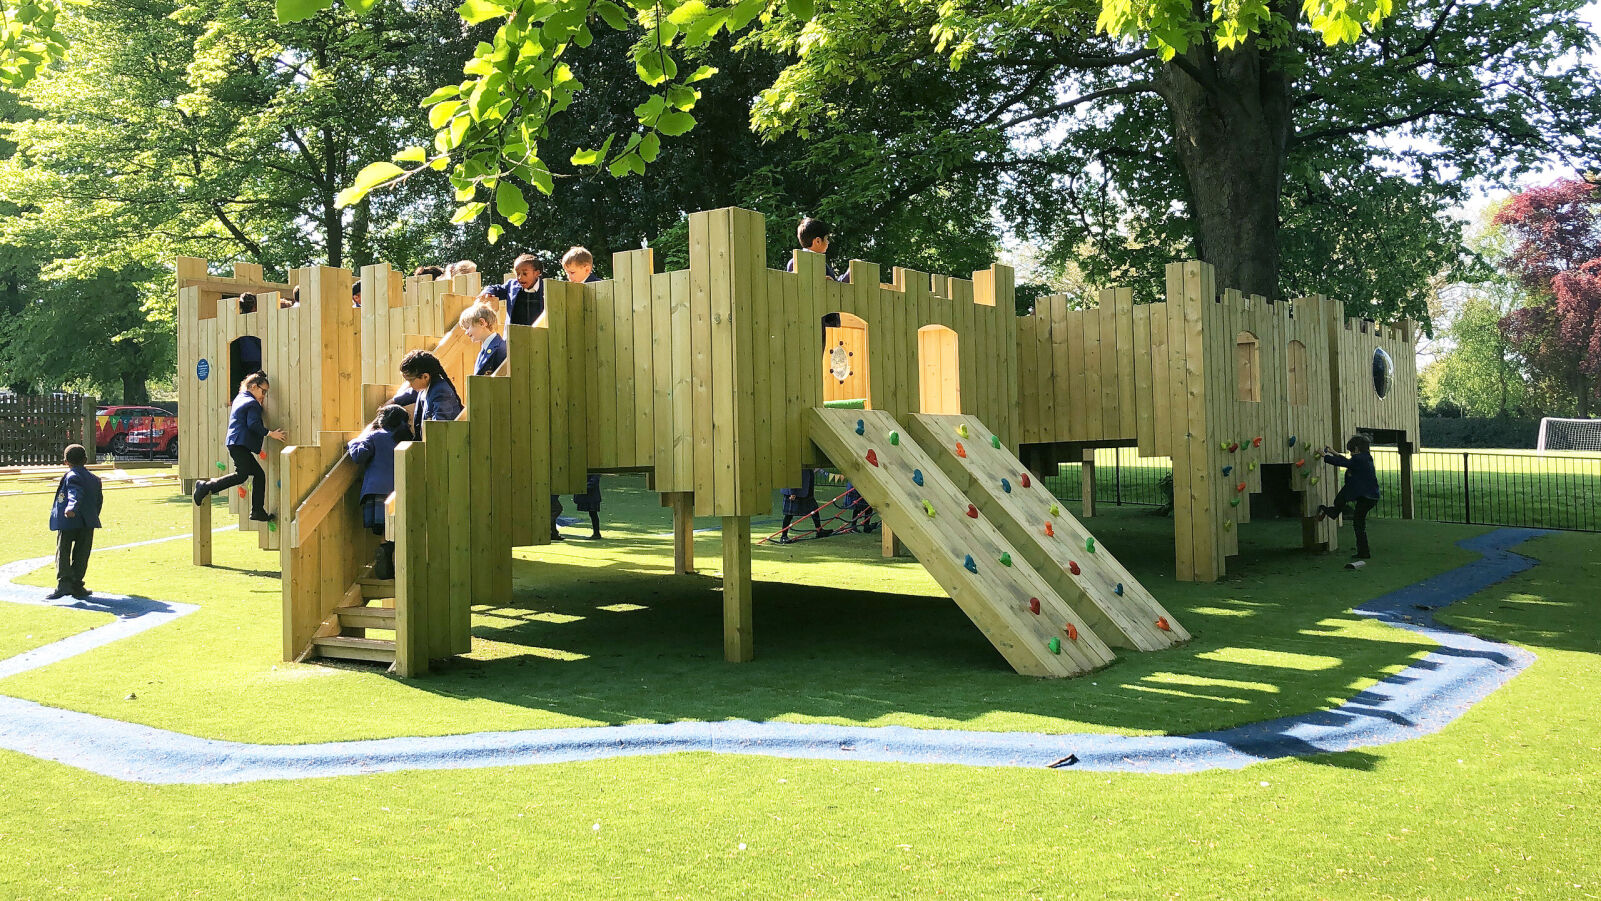 A picture of a treehouse that was installed by Pentagon Play for The Royal Wolverhampton School. It shows children engaging with the structure.